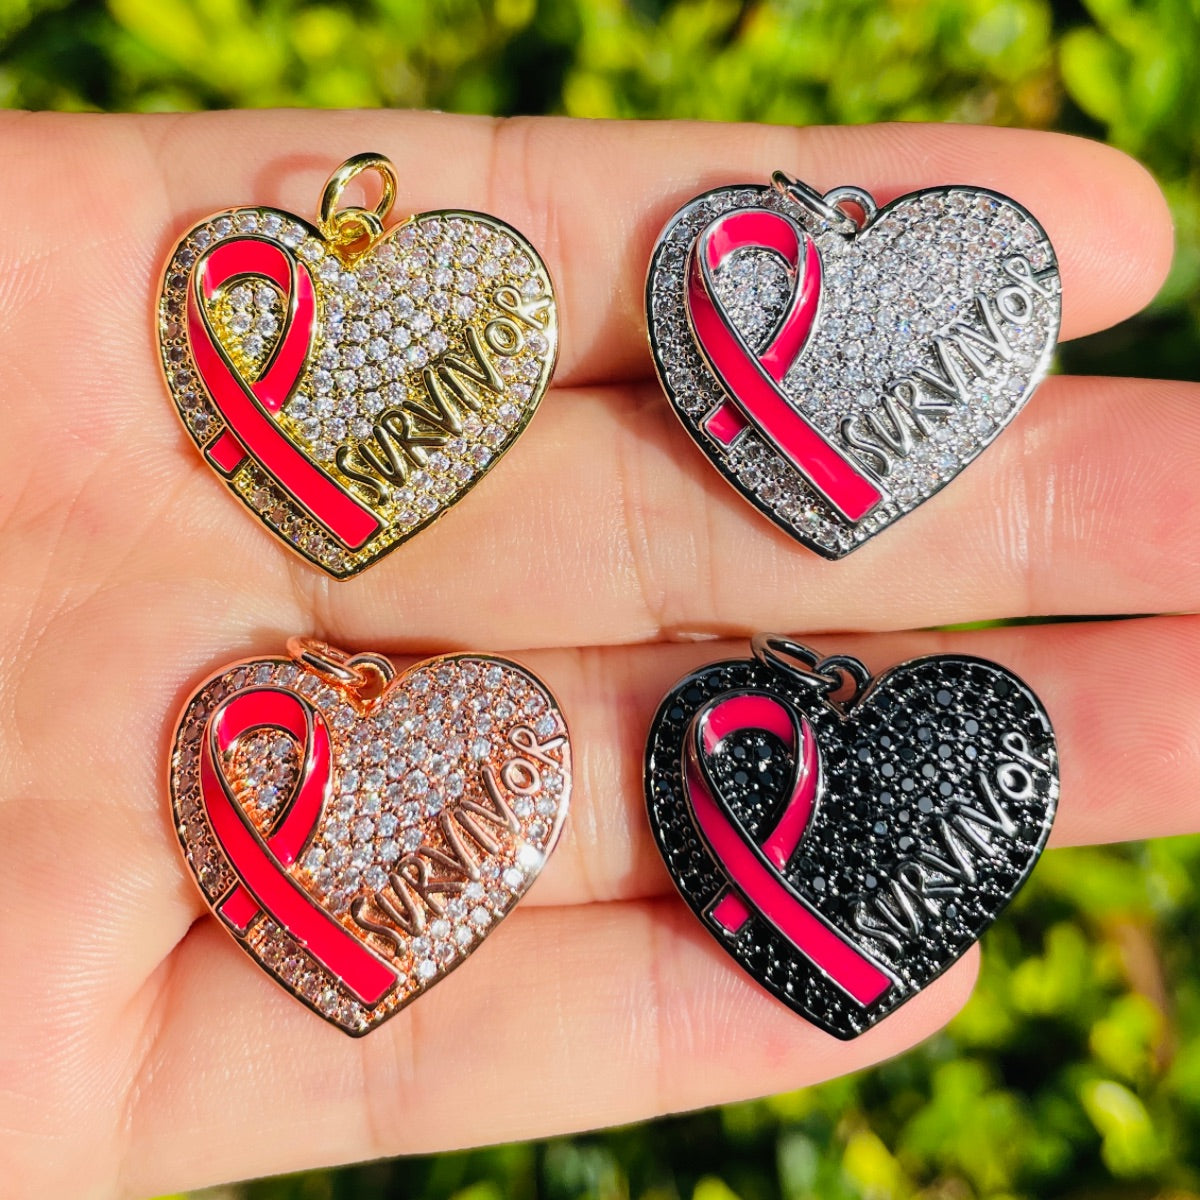 10pcs/lot CZ Pave Pink Ribbon Heart Survivor Word Charms - Breast Cancer Awareness Mix Colors CZ Paved Charms Breast Cancer Awareness Hearts New Charms Arrivals Charms Beads Beyond